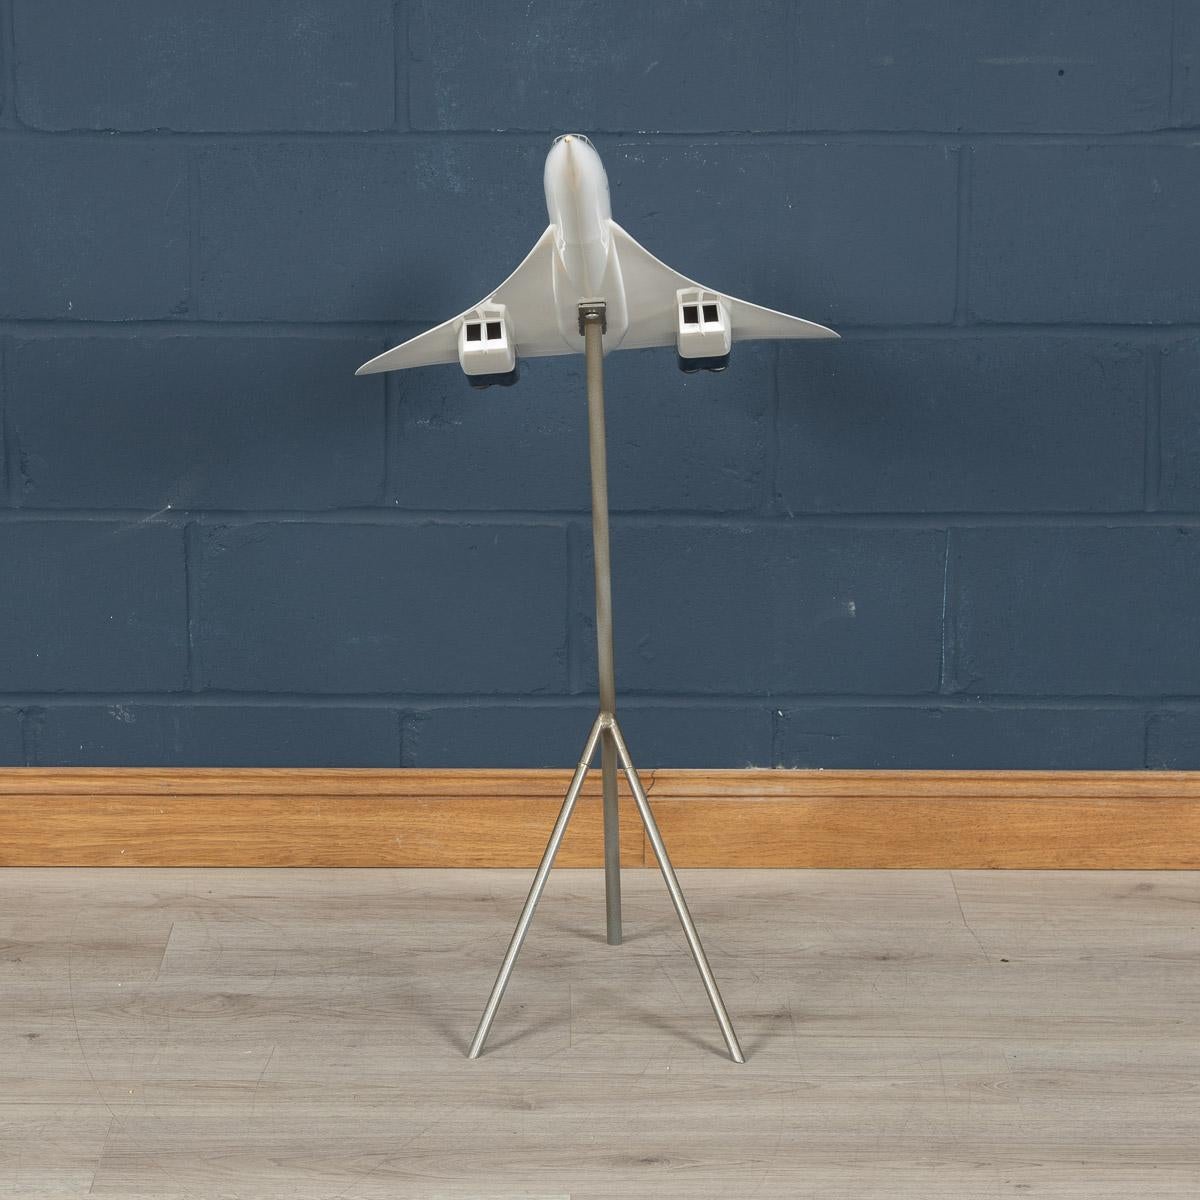 A splendid vintage fibreglass and plastic composite model of a Concorde in full British Airways livery mounted on a tripod stand by Space Models, circa 1990. This 1:72 scale aircraft model was presented to one of BA's top travel agents to use for